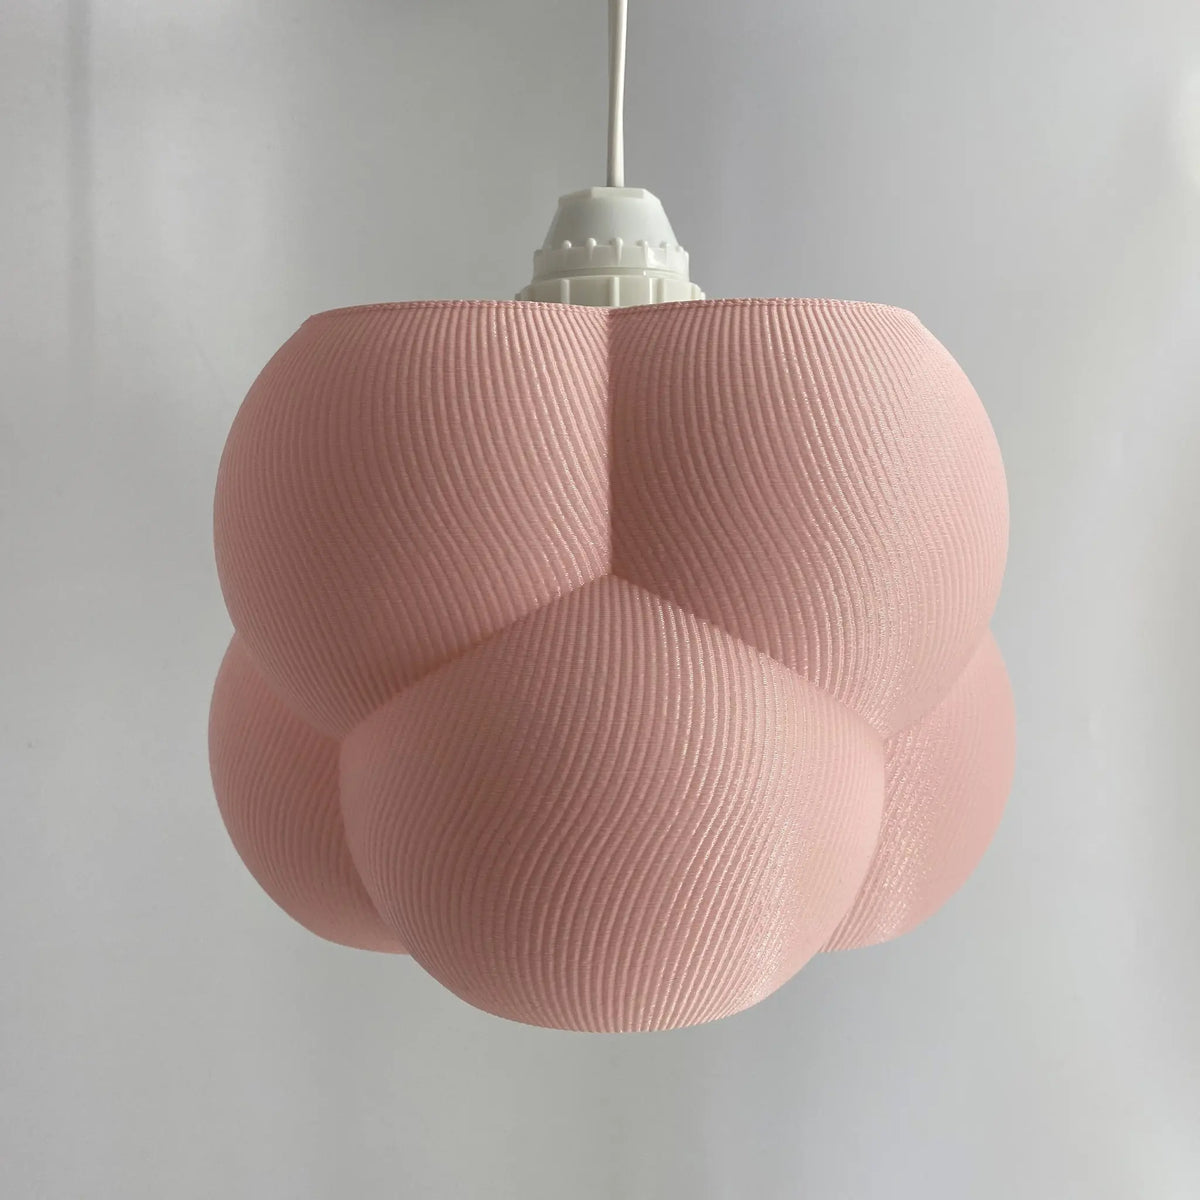 The Cloud Lampshade: Serene &amp; Soft Lighting for a Calm Home